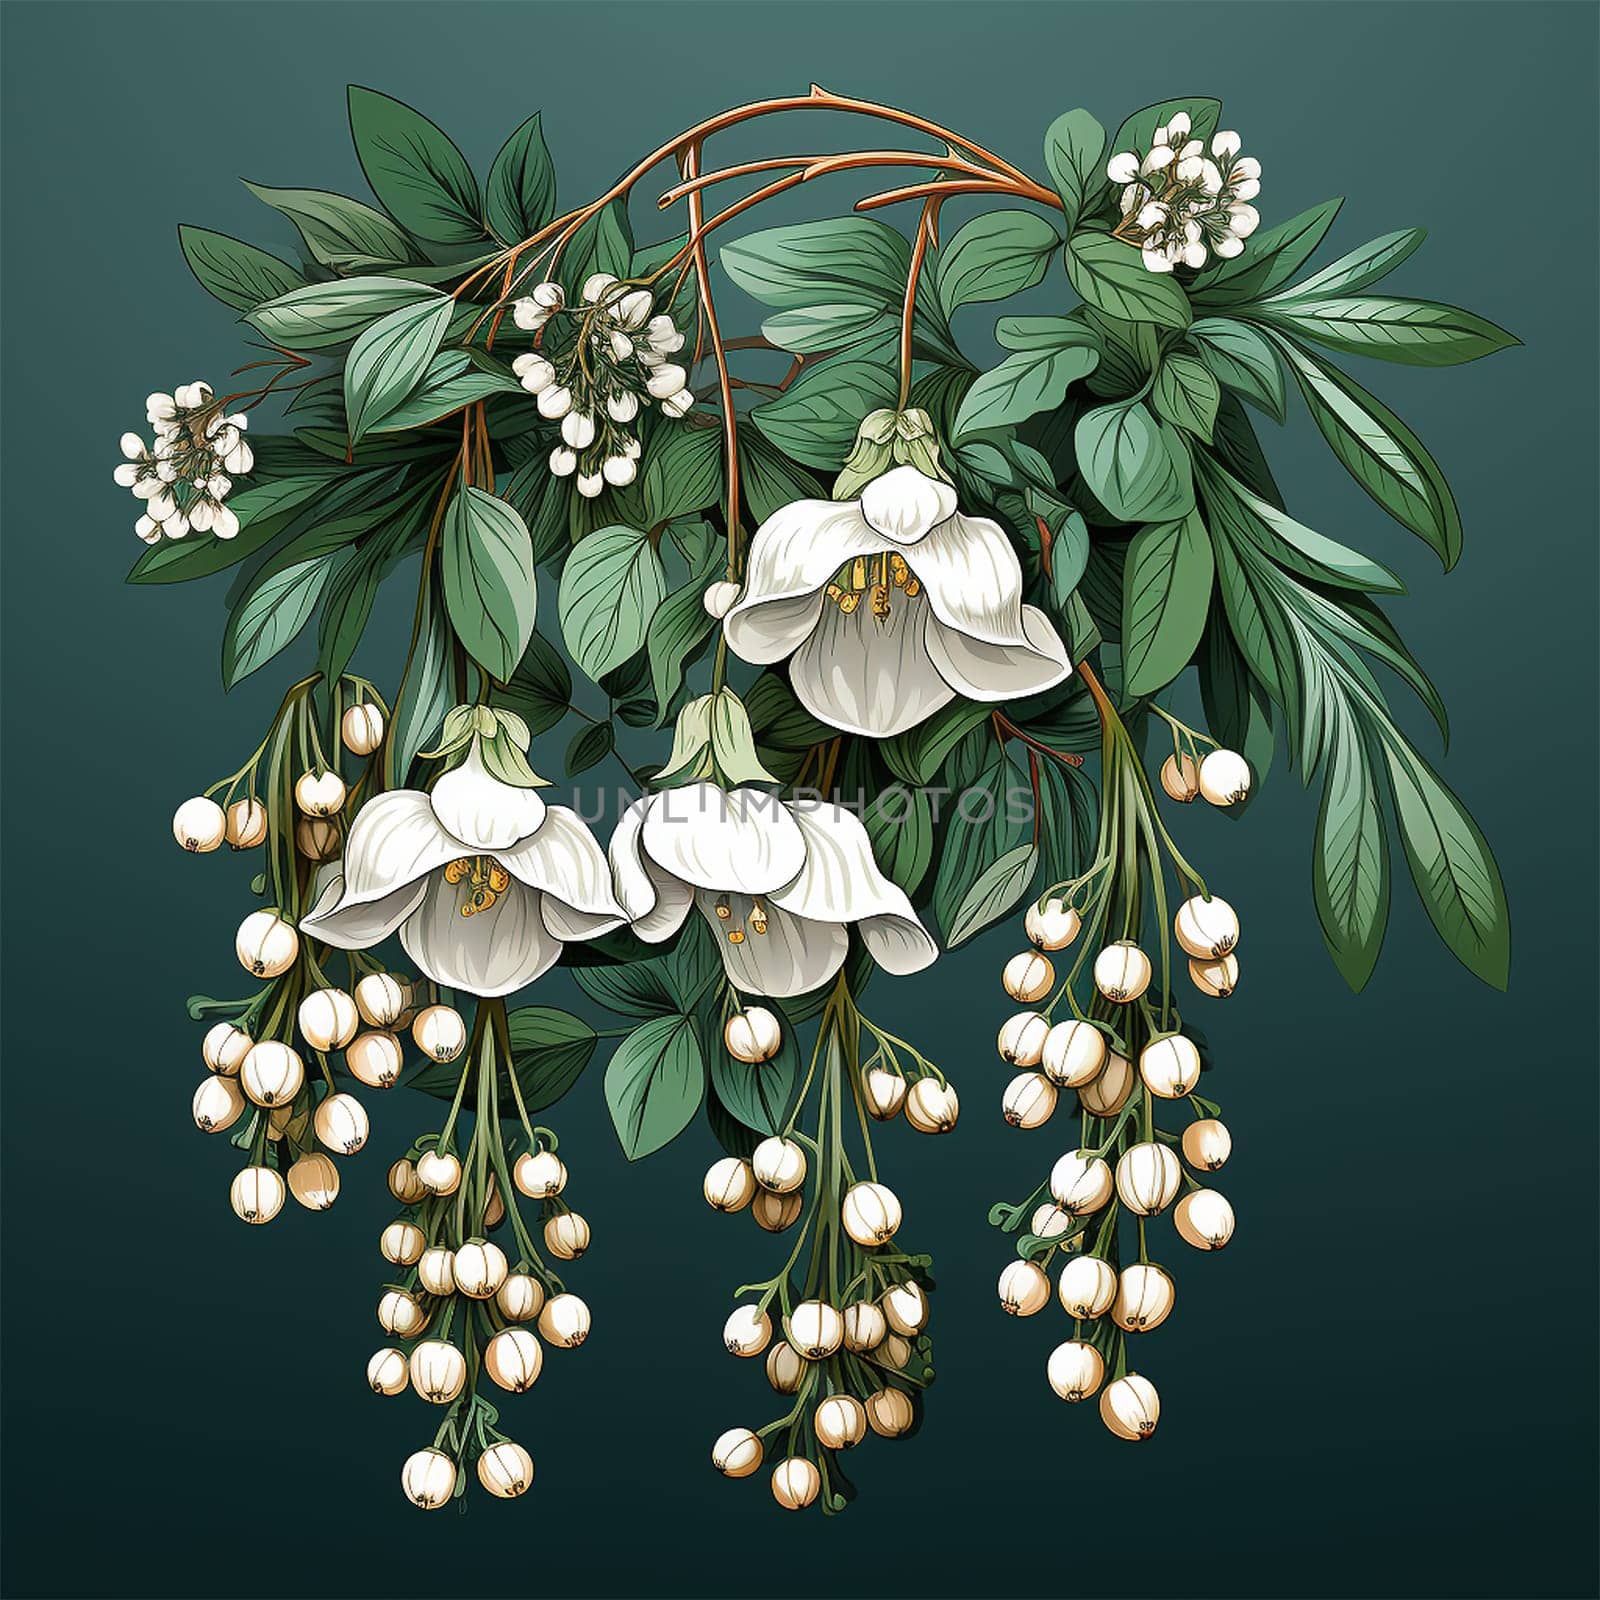 Spring flowers. Snowdrops illustration. Snowdrops blooming through the snow. Simple flat illustration on green isolated background. Branch